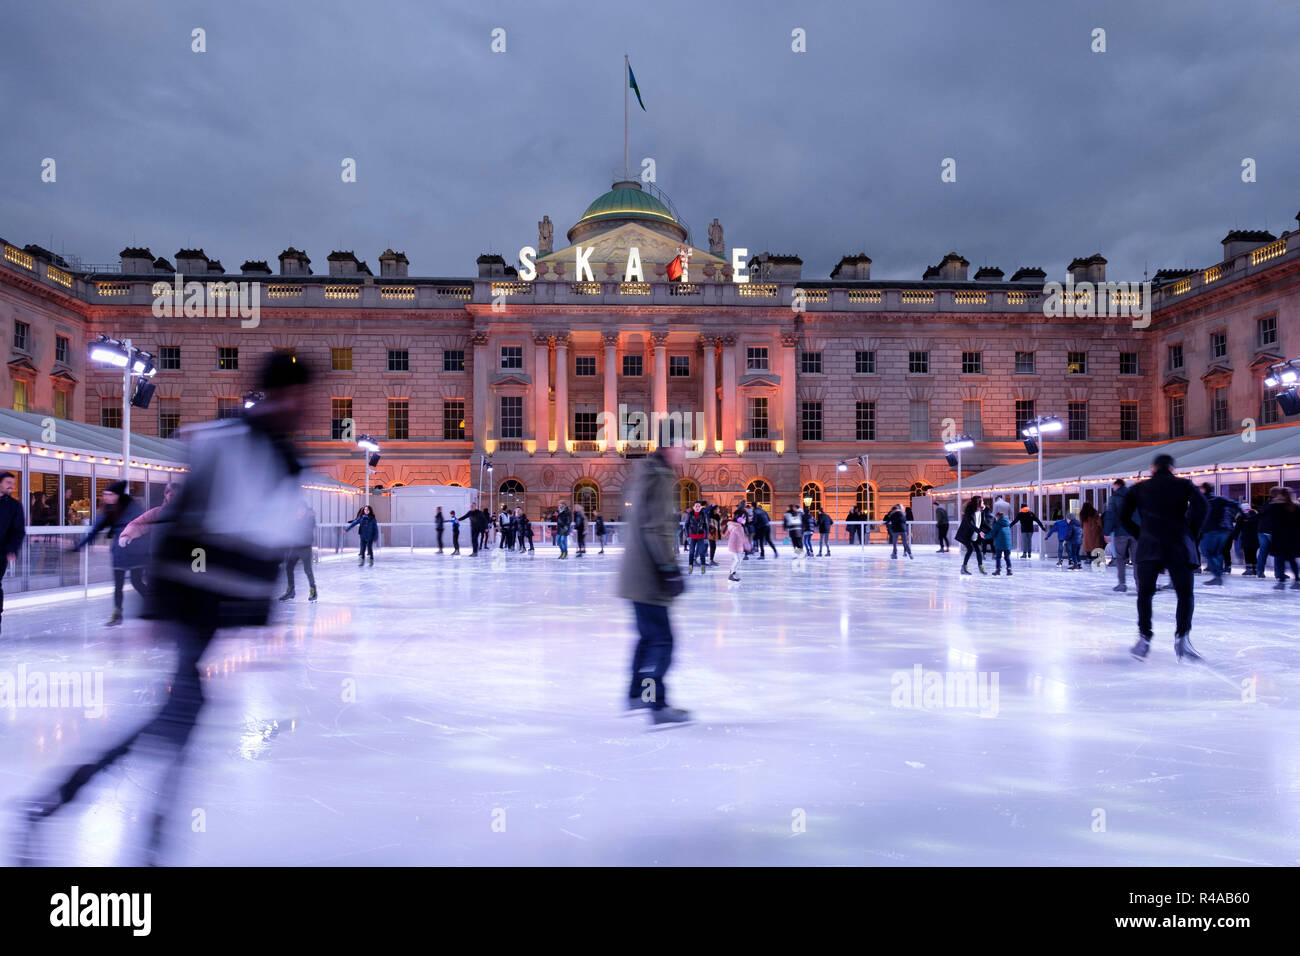 Skaters at dusk on the pop-up ice rink at Somerset House, London, England Stock Photo